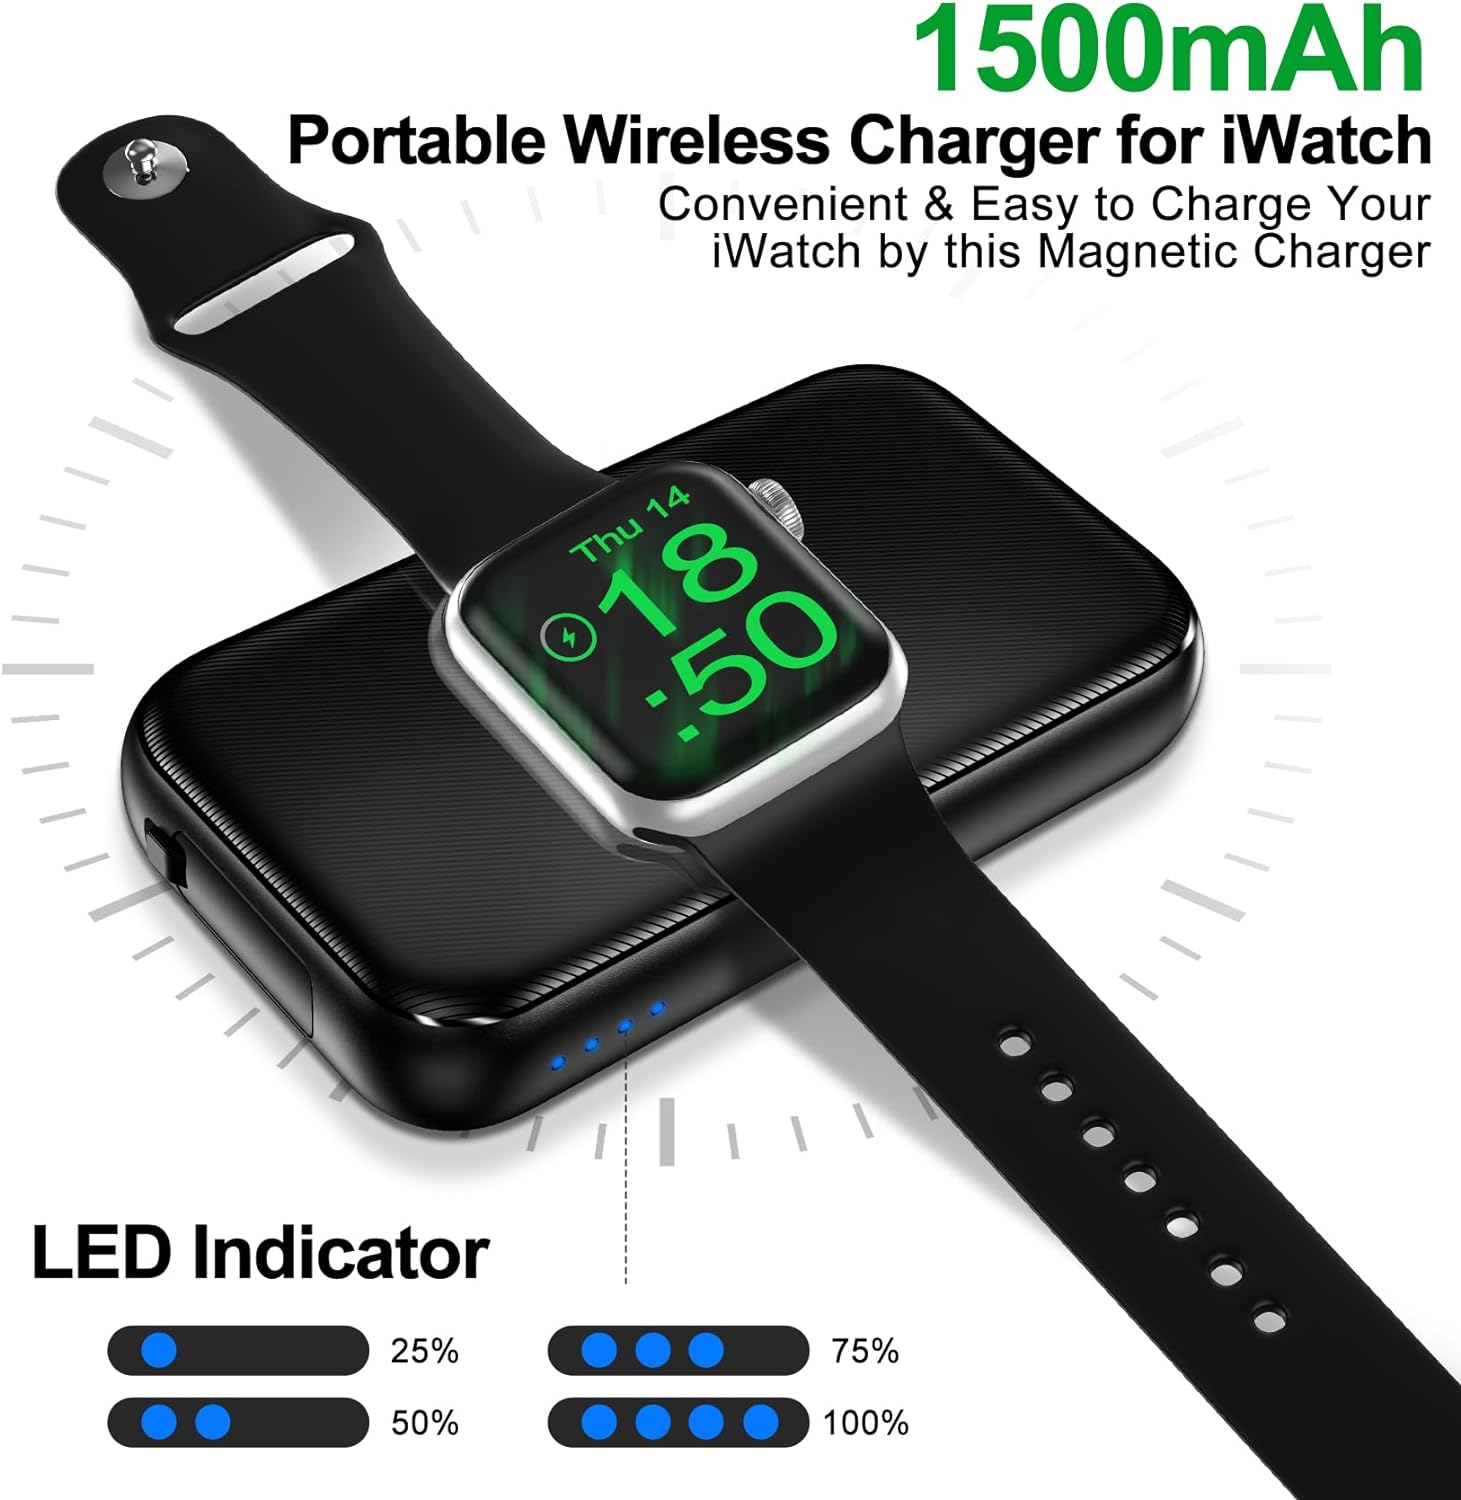 𝟮𝟬𝟮𝟯 𝐔𝐩𝐠𝐫𝐚𝐝𝐞𝐝 Portable Iwatch Charger For Apple Watch Series 8/Uitra/7/6/5/4/3/2/Se/,1500Mah Magnetic Wireless Charger Power Bank [Ipx5 Waterproof] Travel Battery Pack-Black